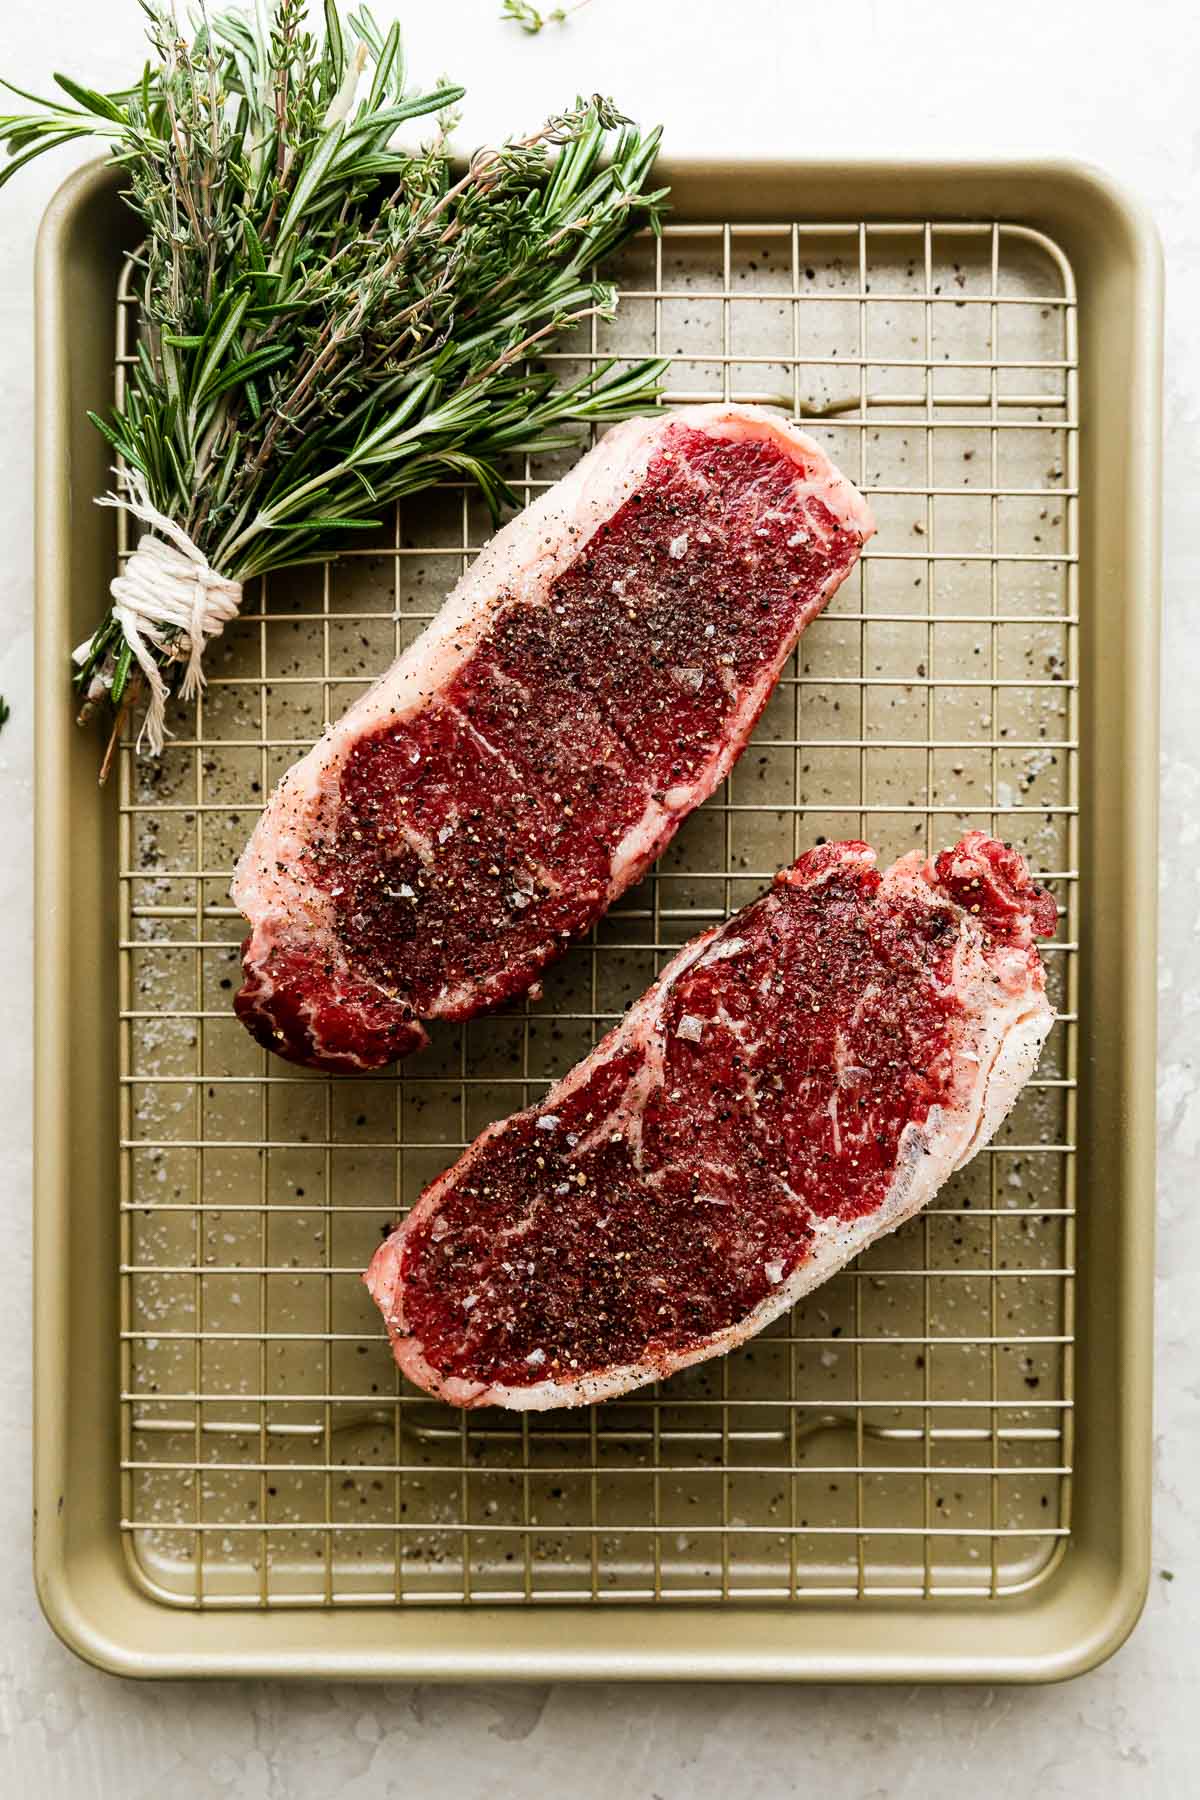 https://playswellwithbutter.com/wp-content/uploads/2022/05/Perfect-Grilled-Steak-Butter-Basted-with-Herb-Brush-9.jpg